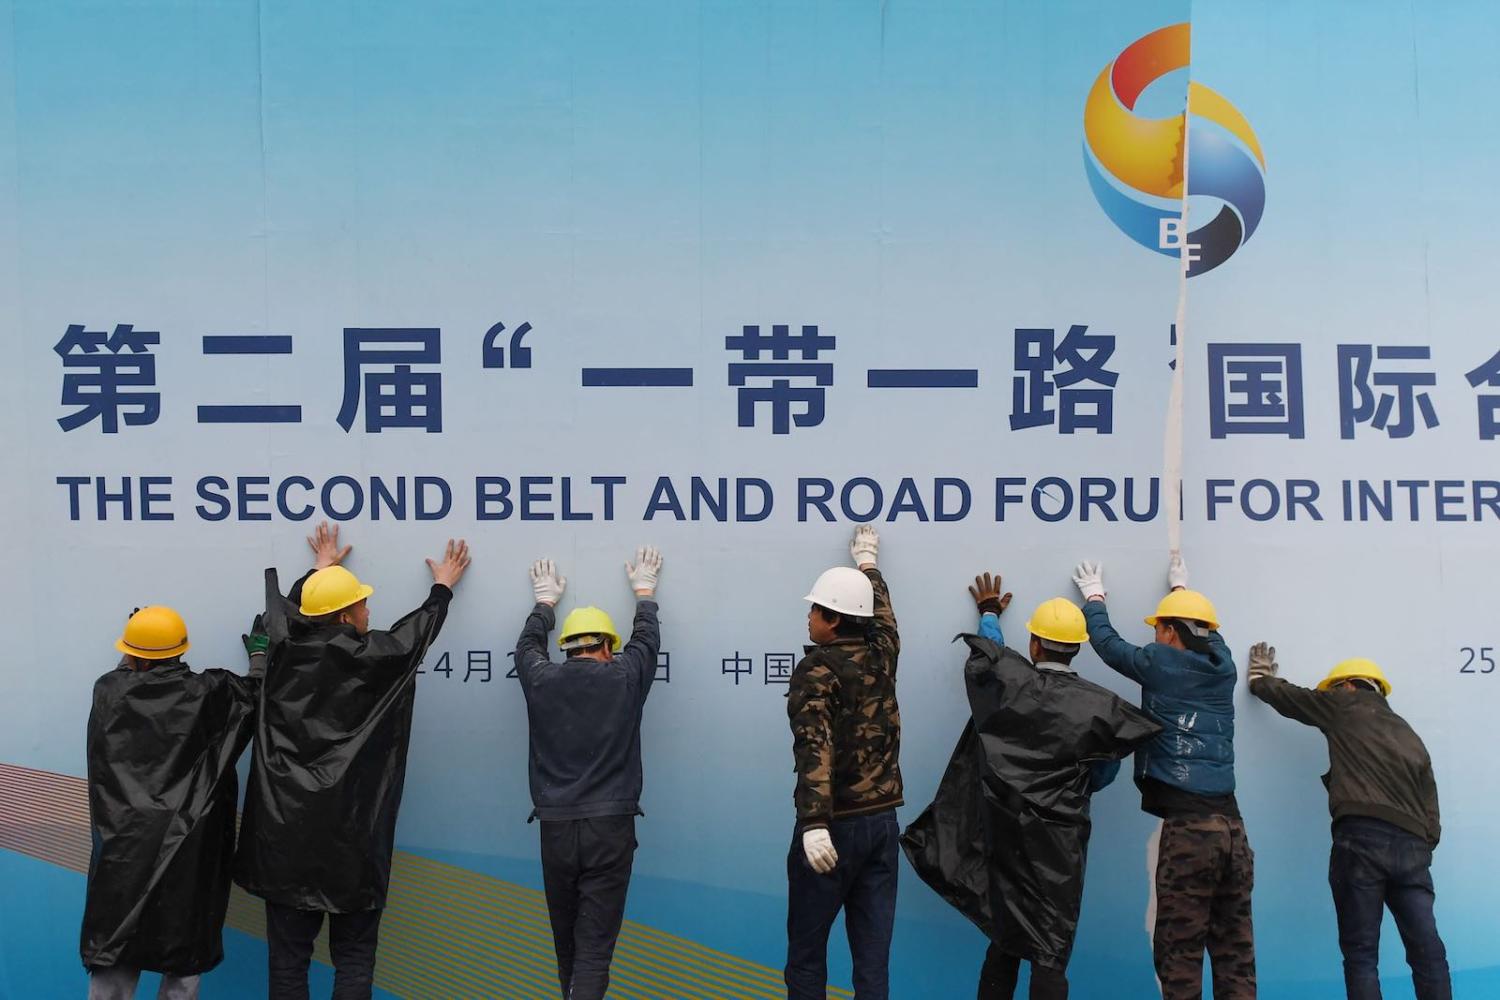 Workers take down a Belt and Road Forum panel outside the venue of the forum in Beijing in April (Photo: Greg Baker via Getty)